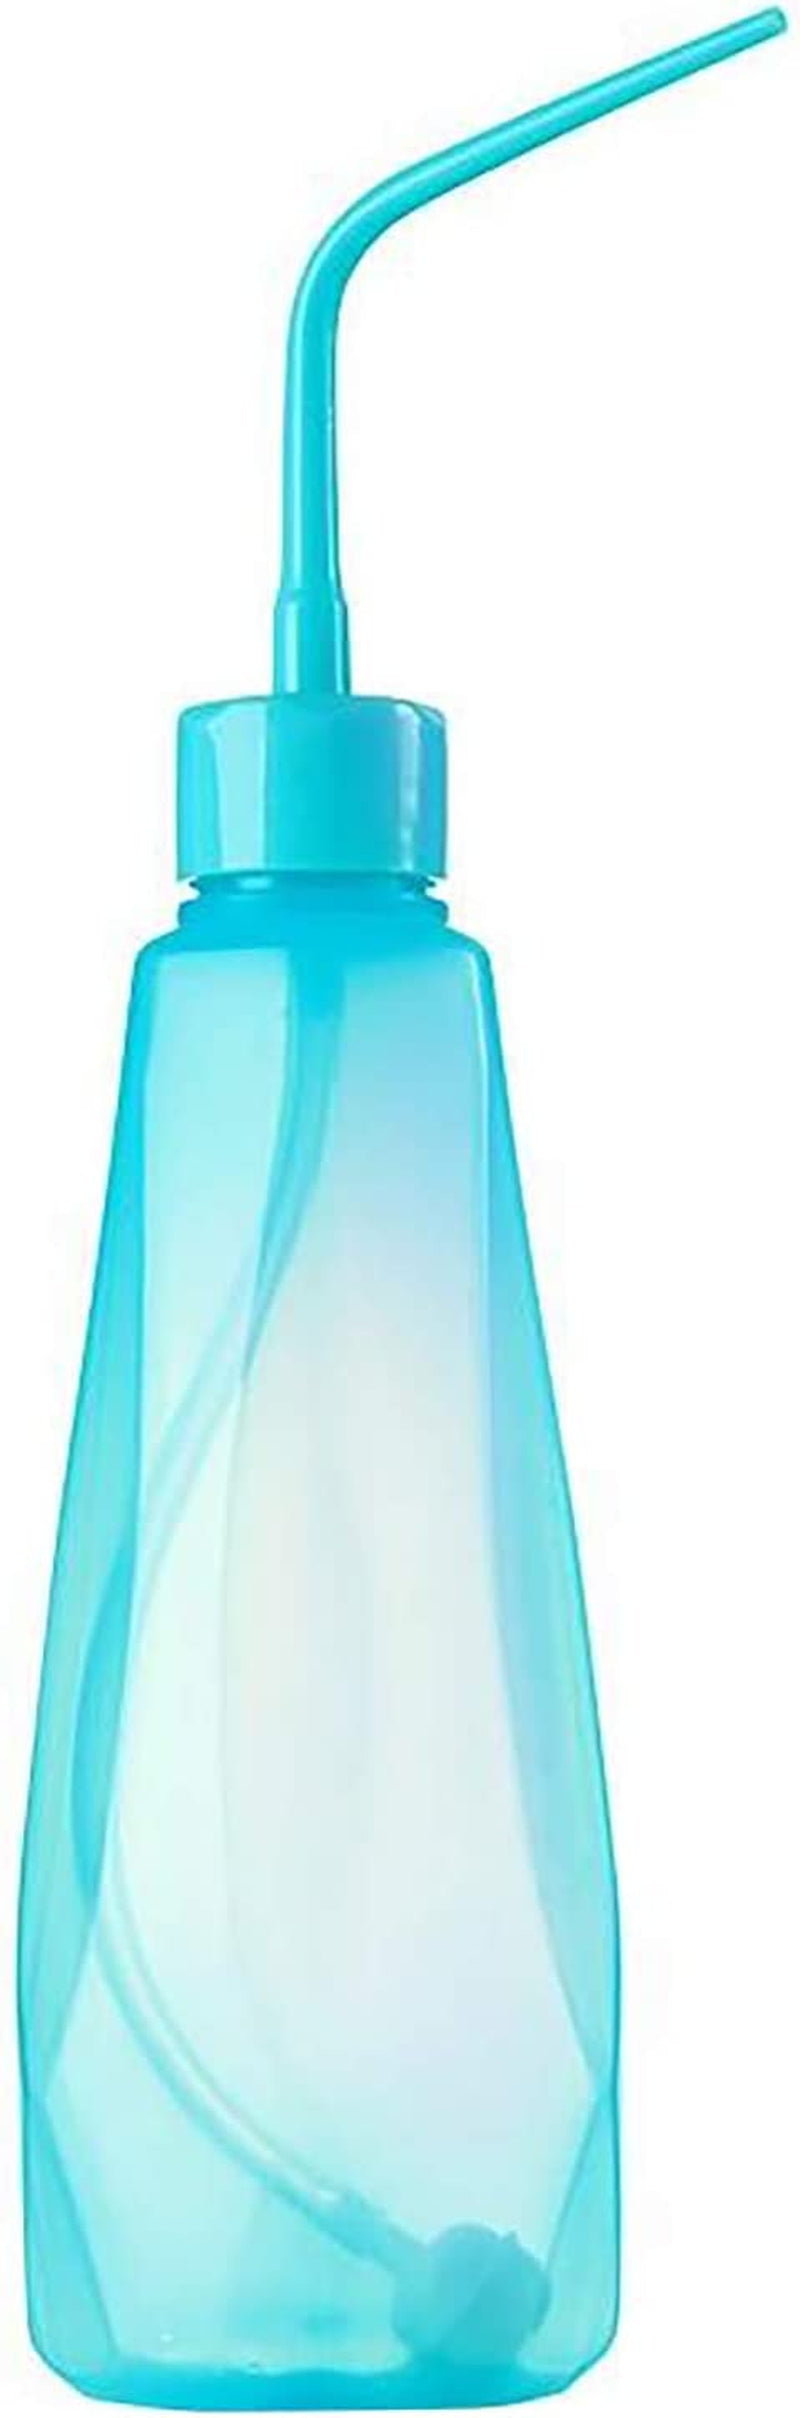 Fodattm, Fodattm 480Ml 16Oz Plastic Succulent Watering Can Bottle with Soft Tube and Ball Shape Suck Head Bend Mouth Squeeze Bottle Micro Landscape Watering Tools Supply (Blue)